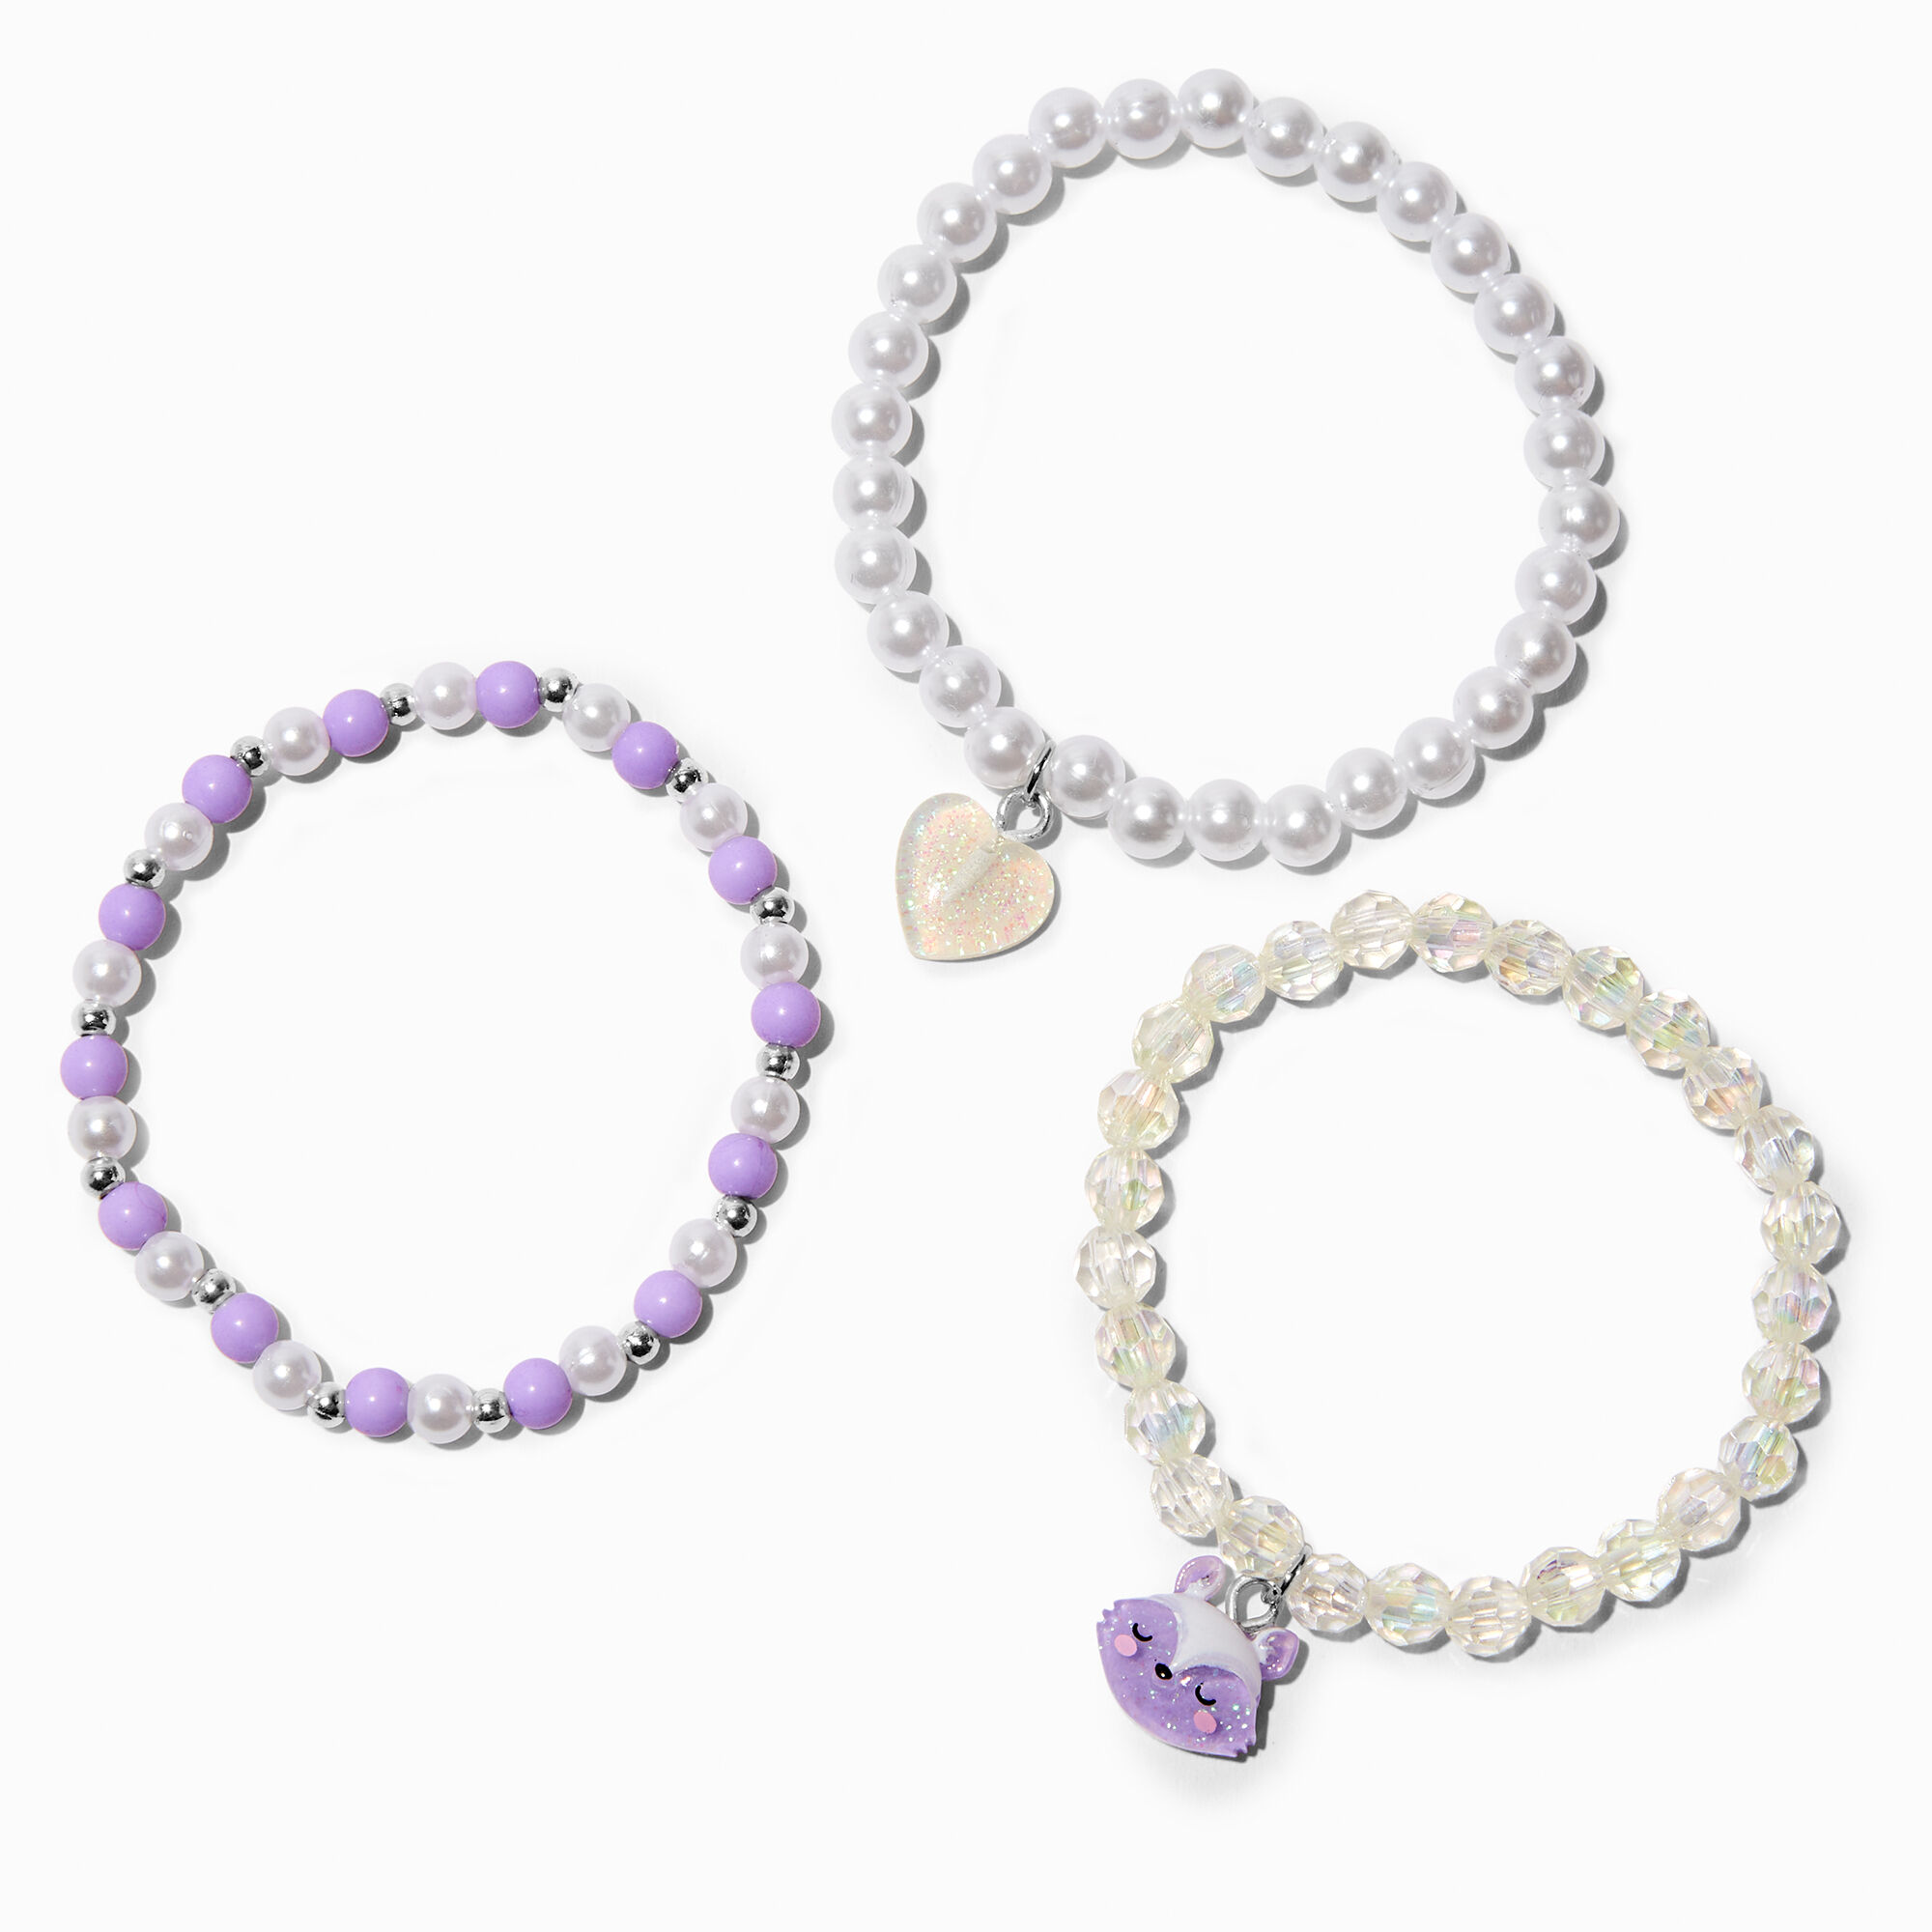 View Claires Club Pearl Fox Bead Stretch Bracelets 3 Pack information